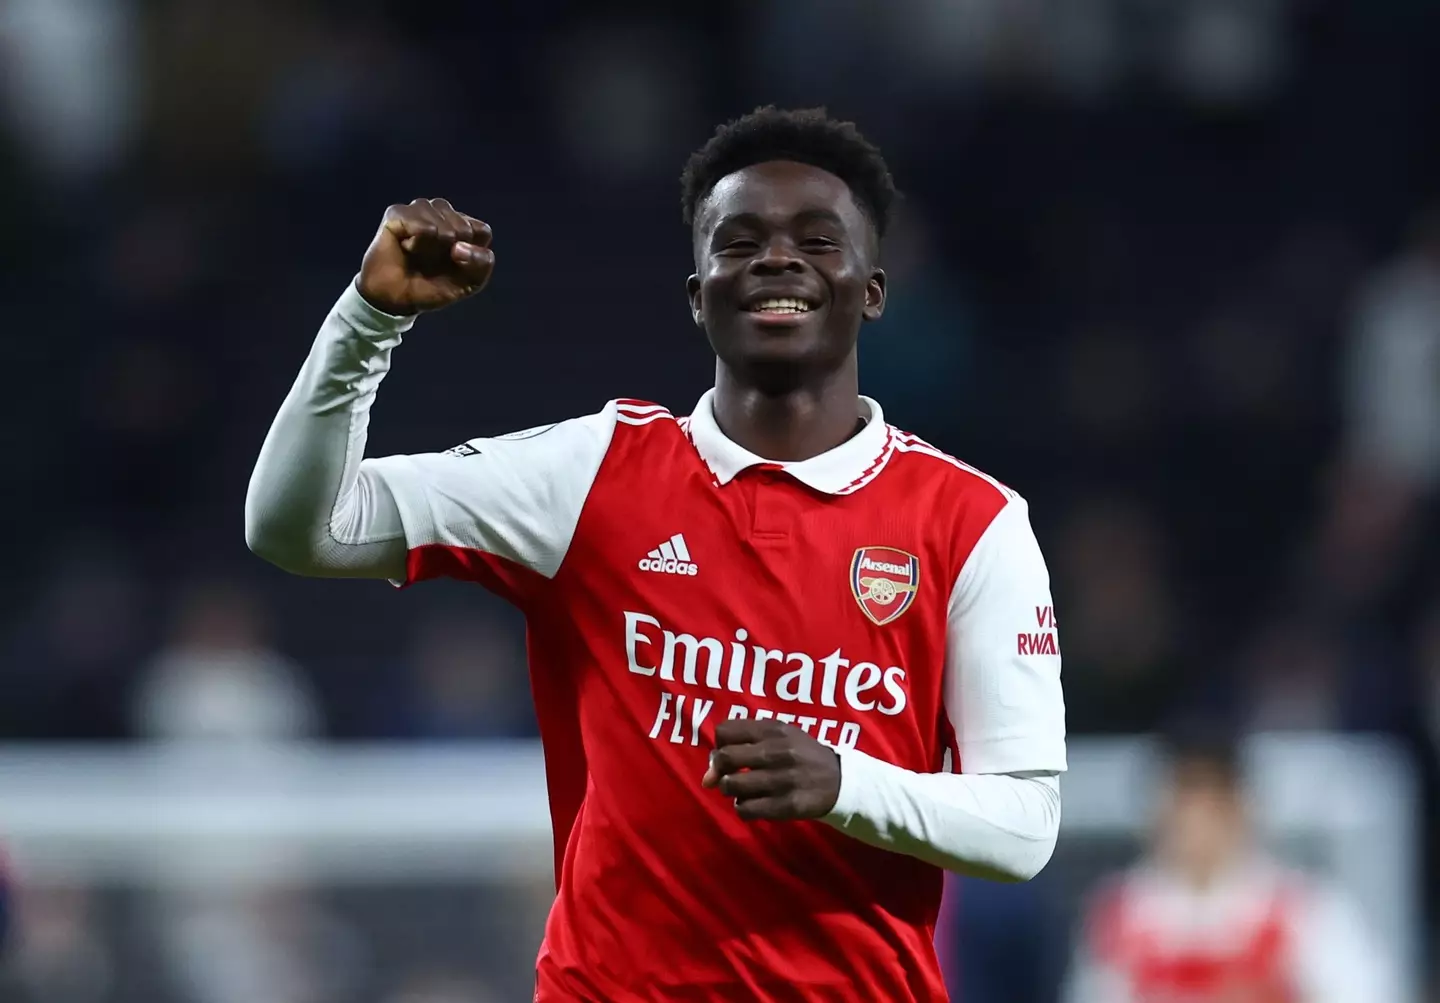 Saka'a form makes him deserving of the huge new contract. Image: Alamy